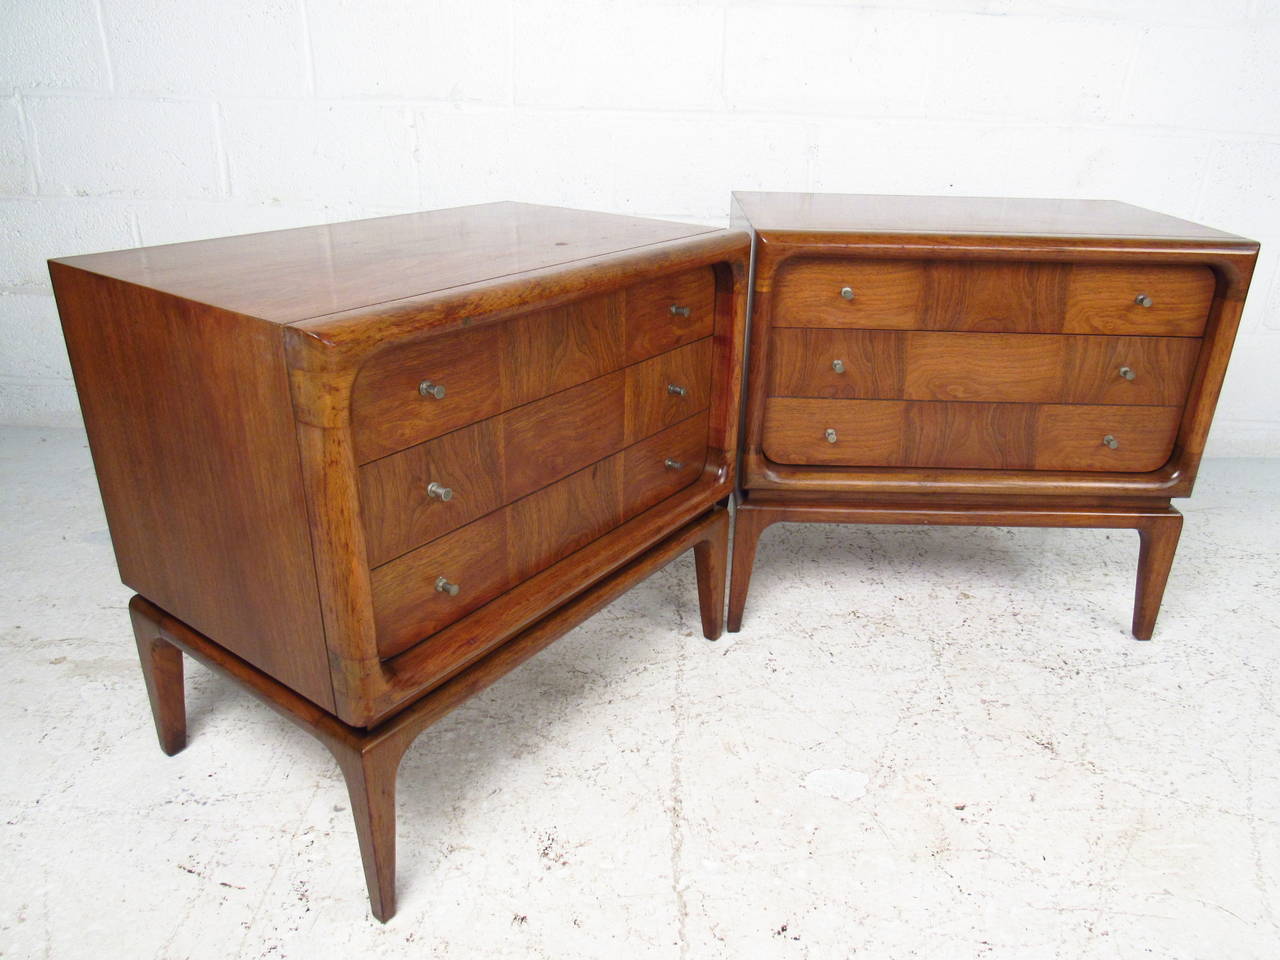 This unique pair of two drawer nightstands feature a mixed veneer pattern on the drawer fronts which compliments the unique pulls and tapered legs. This decorative pair of storage end tables are well suited to any setting, from bedroom nightstands